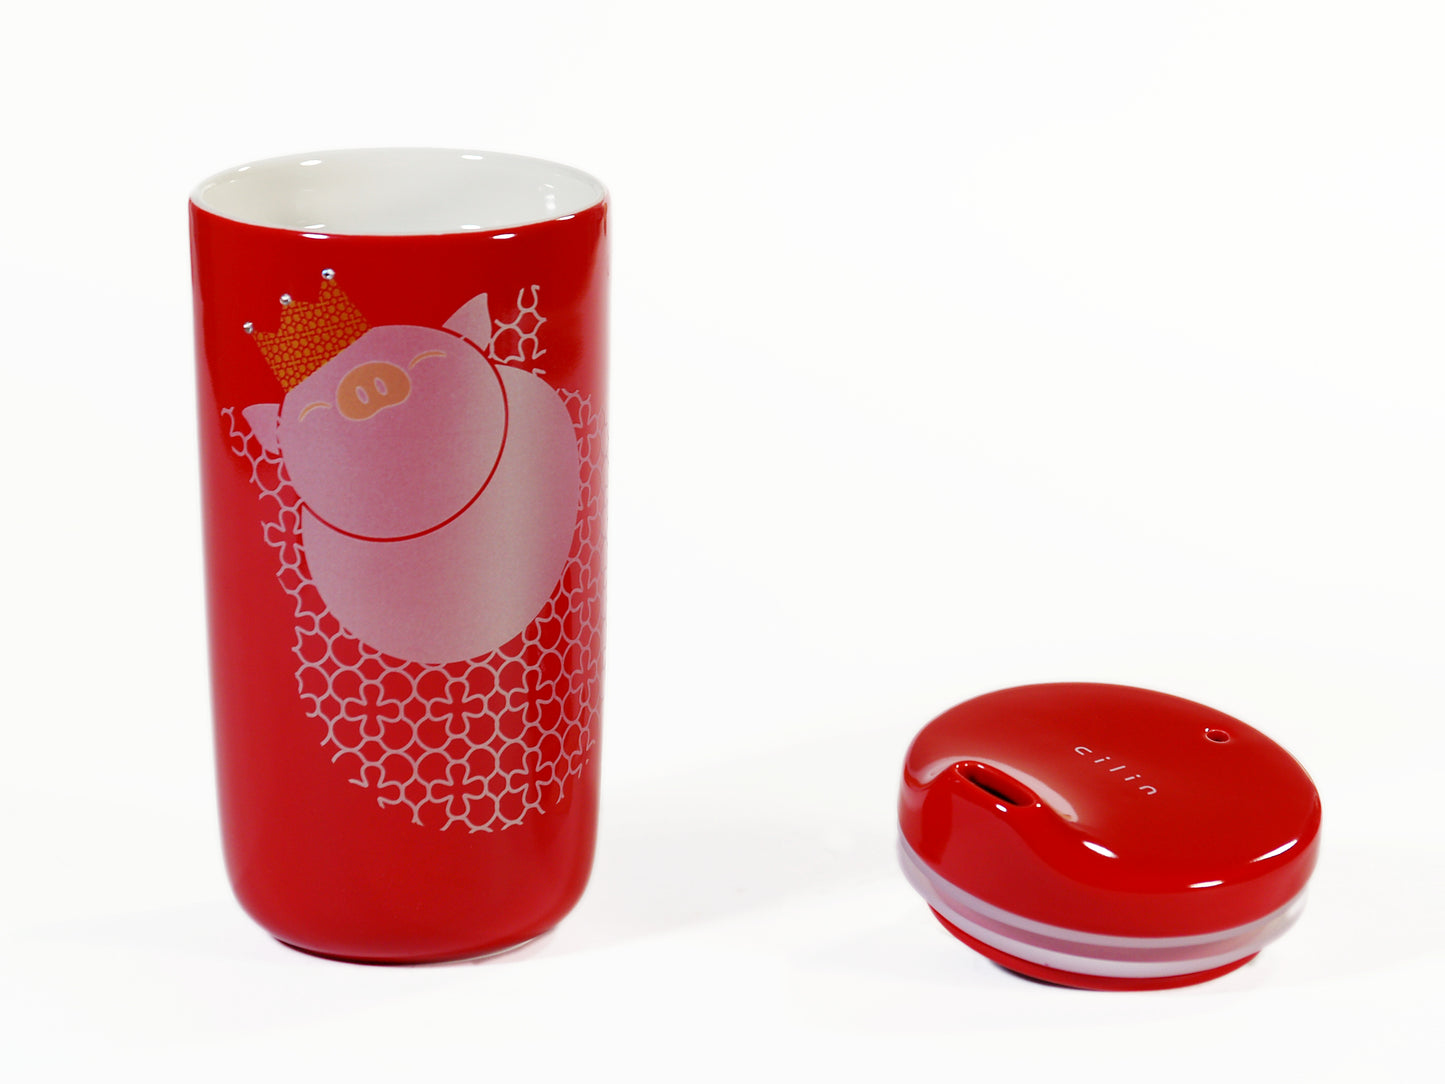 Pig of Prosperity (Double-Walled Tumbler)